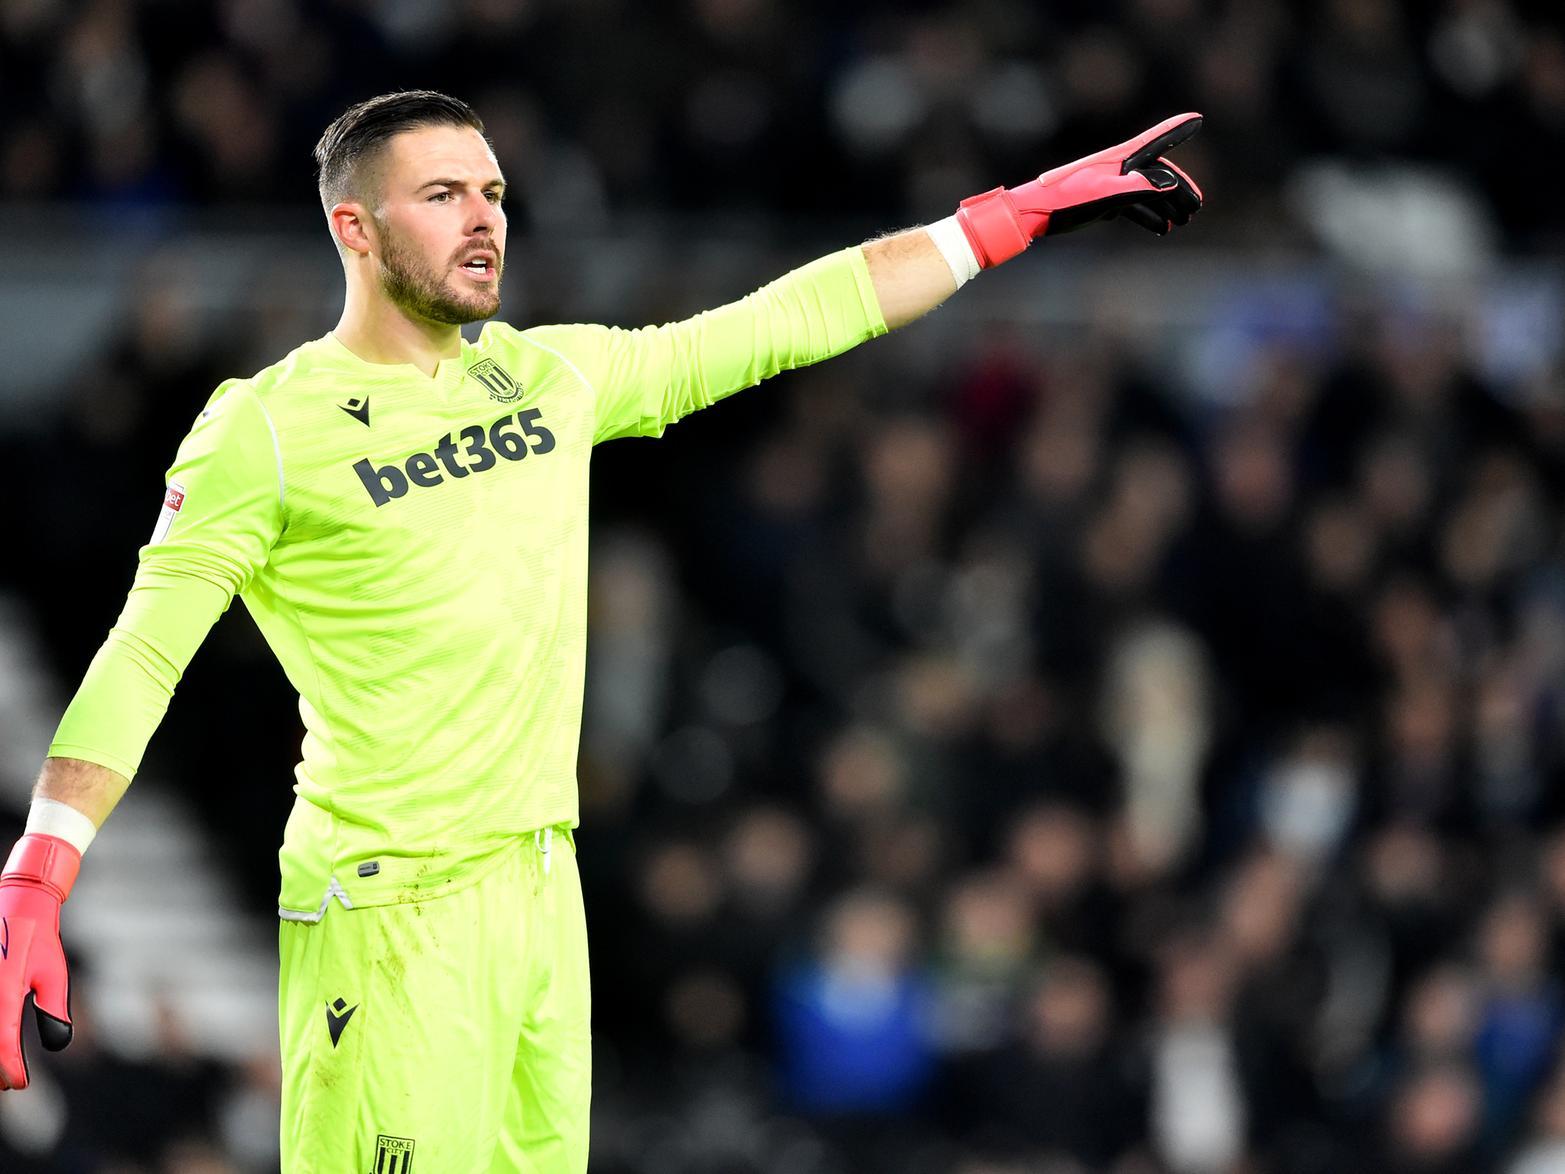 His chances of getting an England call-up for Euro 2020 aren't looking great, but he was in excellent form as his side earned a 0-0 draw with Blackburn Rovers. Butland saved all six of the opposition shots on target.